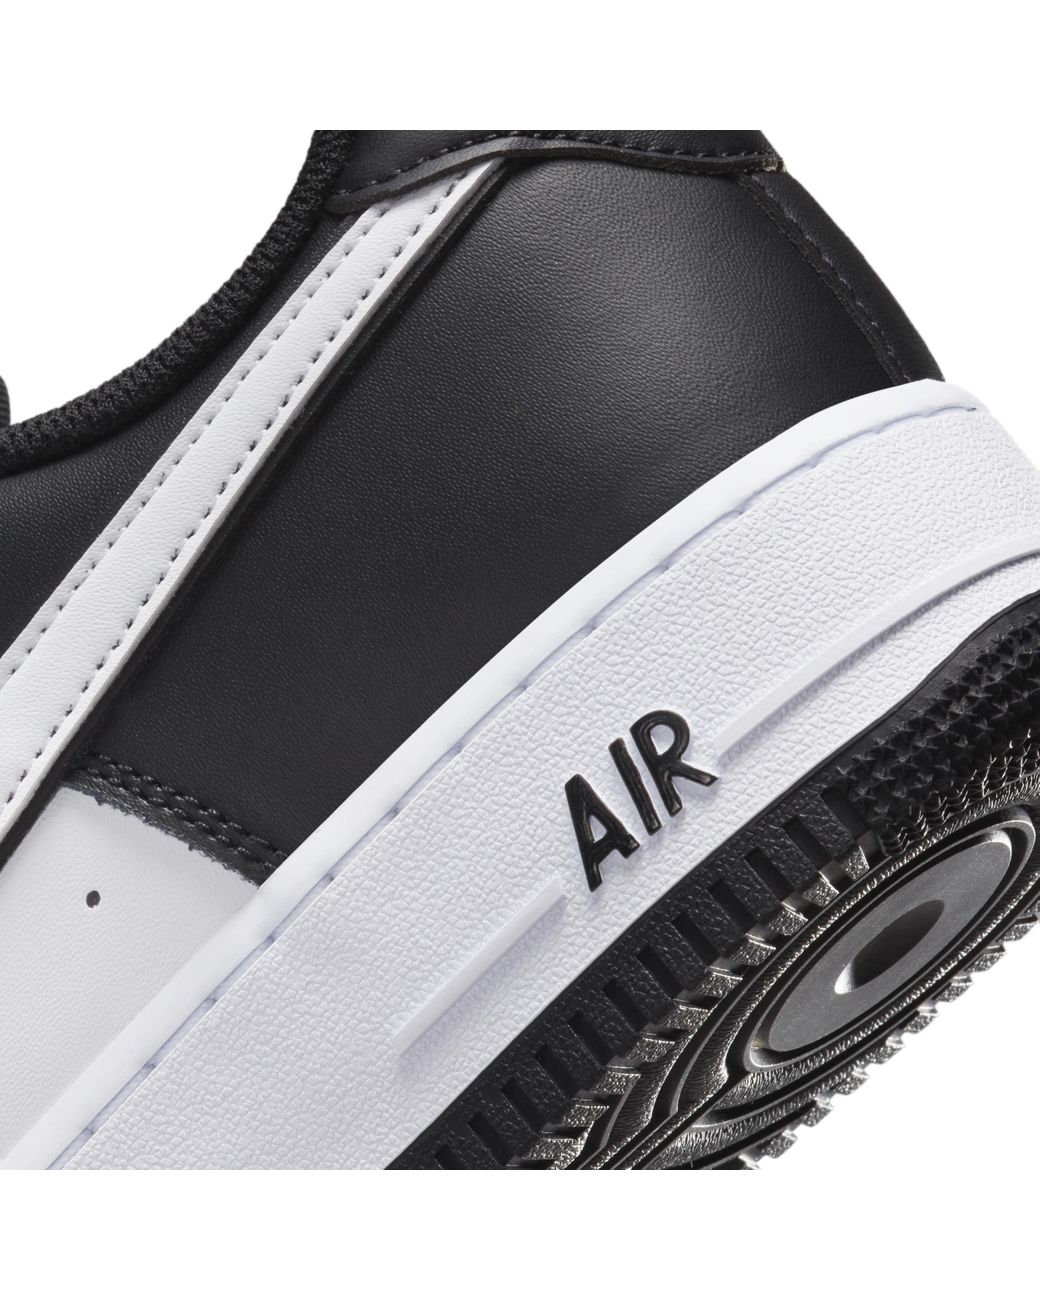 Nike Air Force 1 '07 Shoes In Black, for Men | Lyst